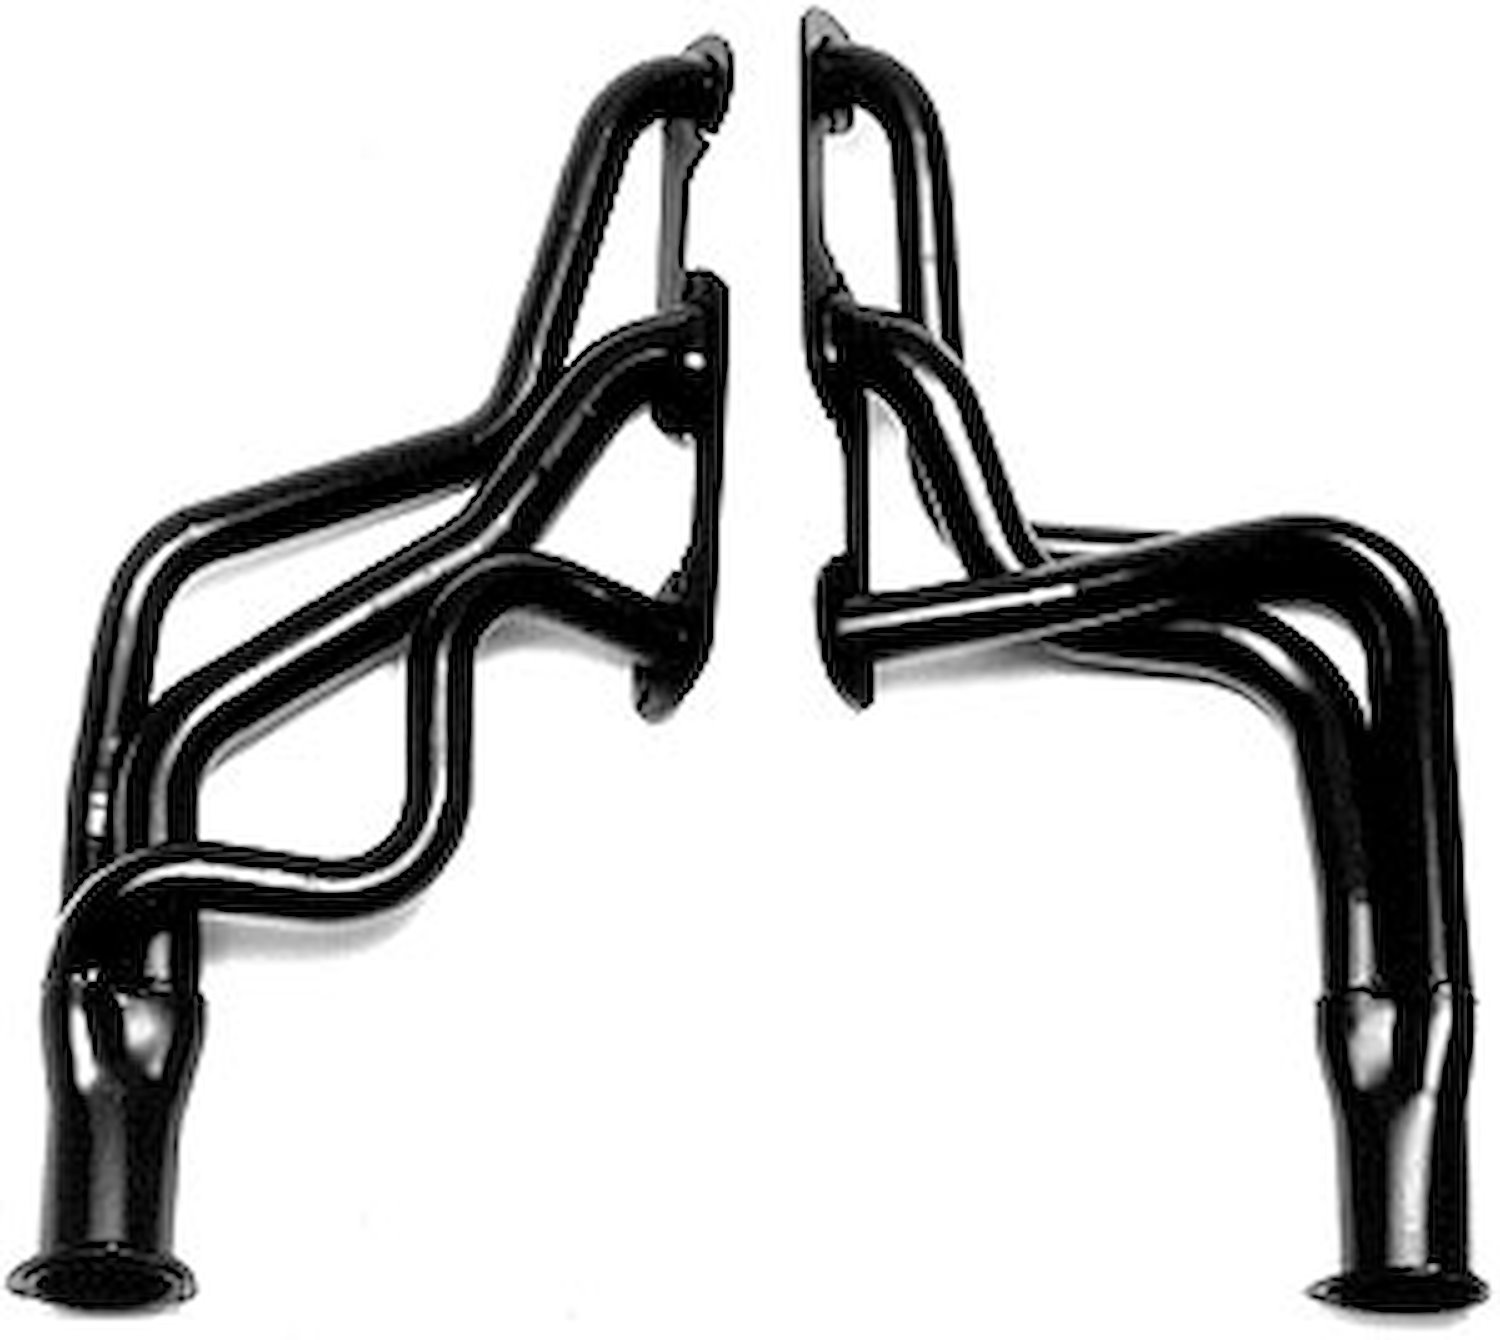 Standard Duty Uncoated Full Length Headers for 1964-81 Pontiac Grand Prix, Le Mans, GTO, Firebird, Tempest, Grand Am 326-455